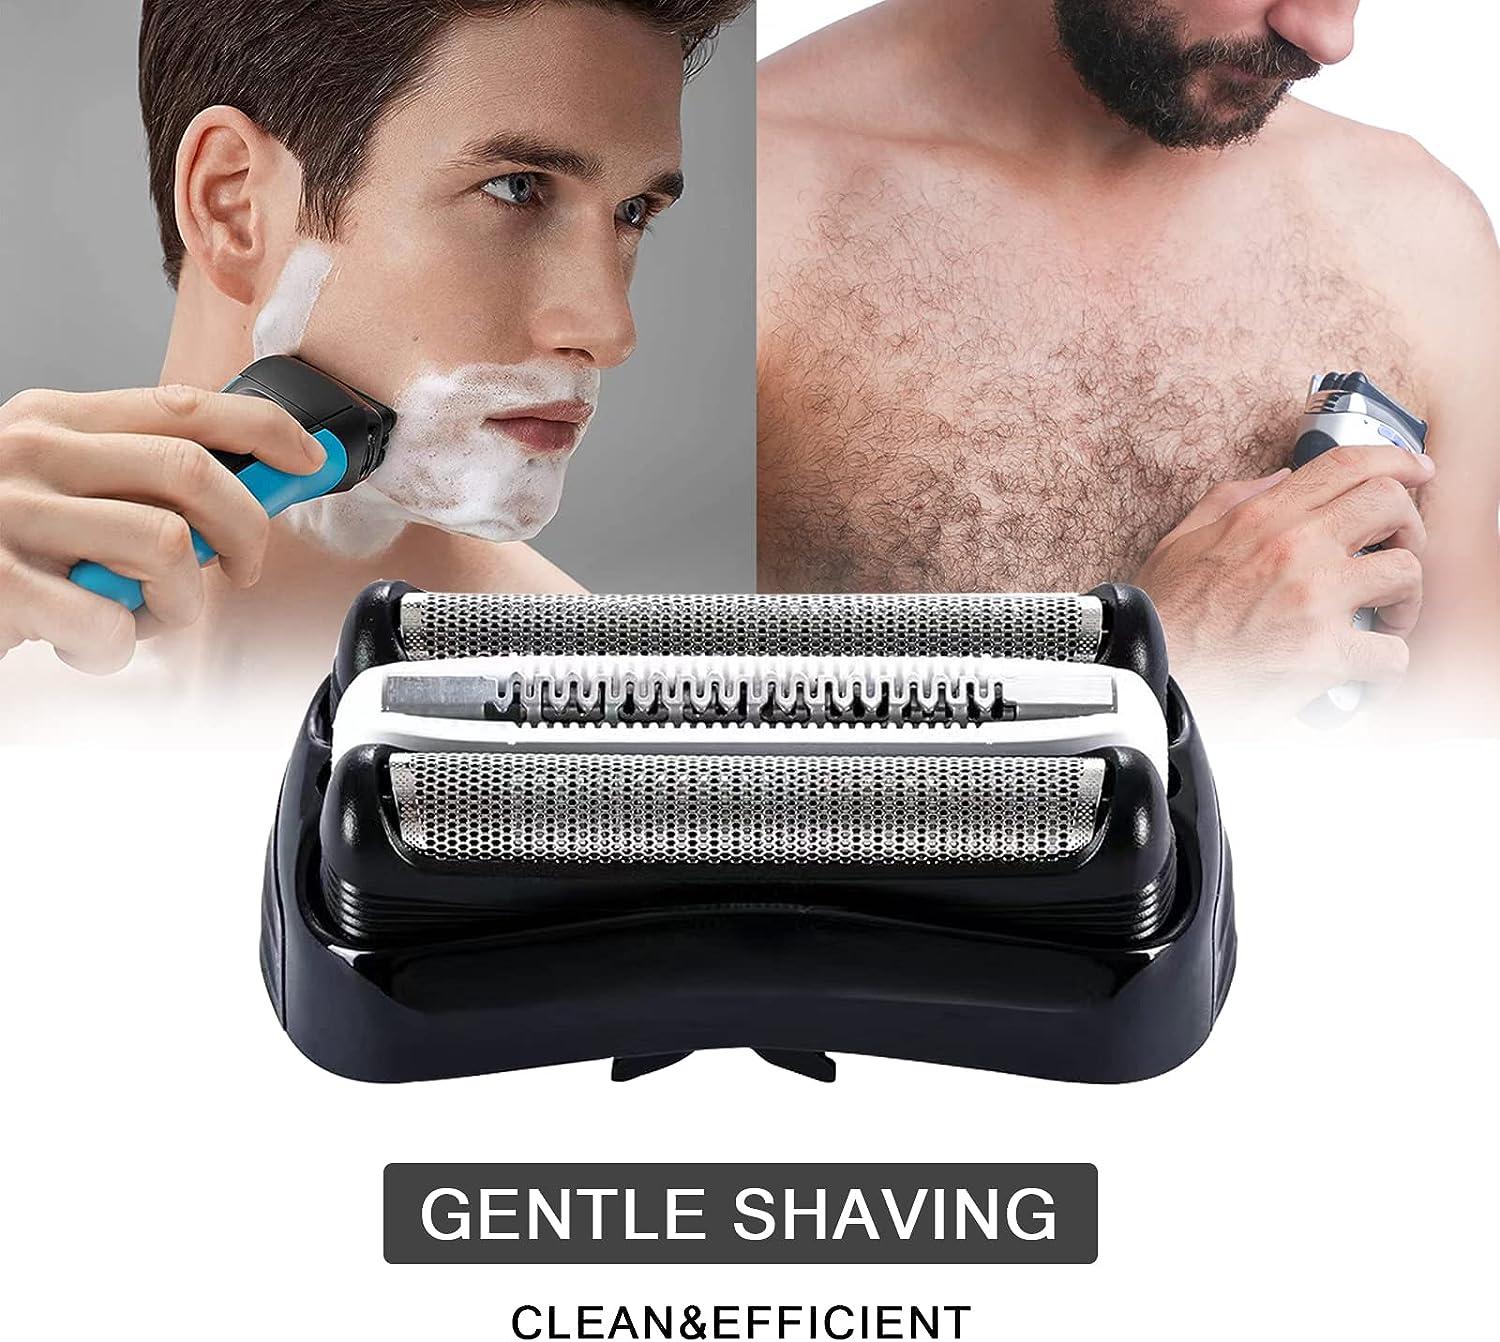 Efficient shave with Braun replacement heads